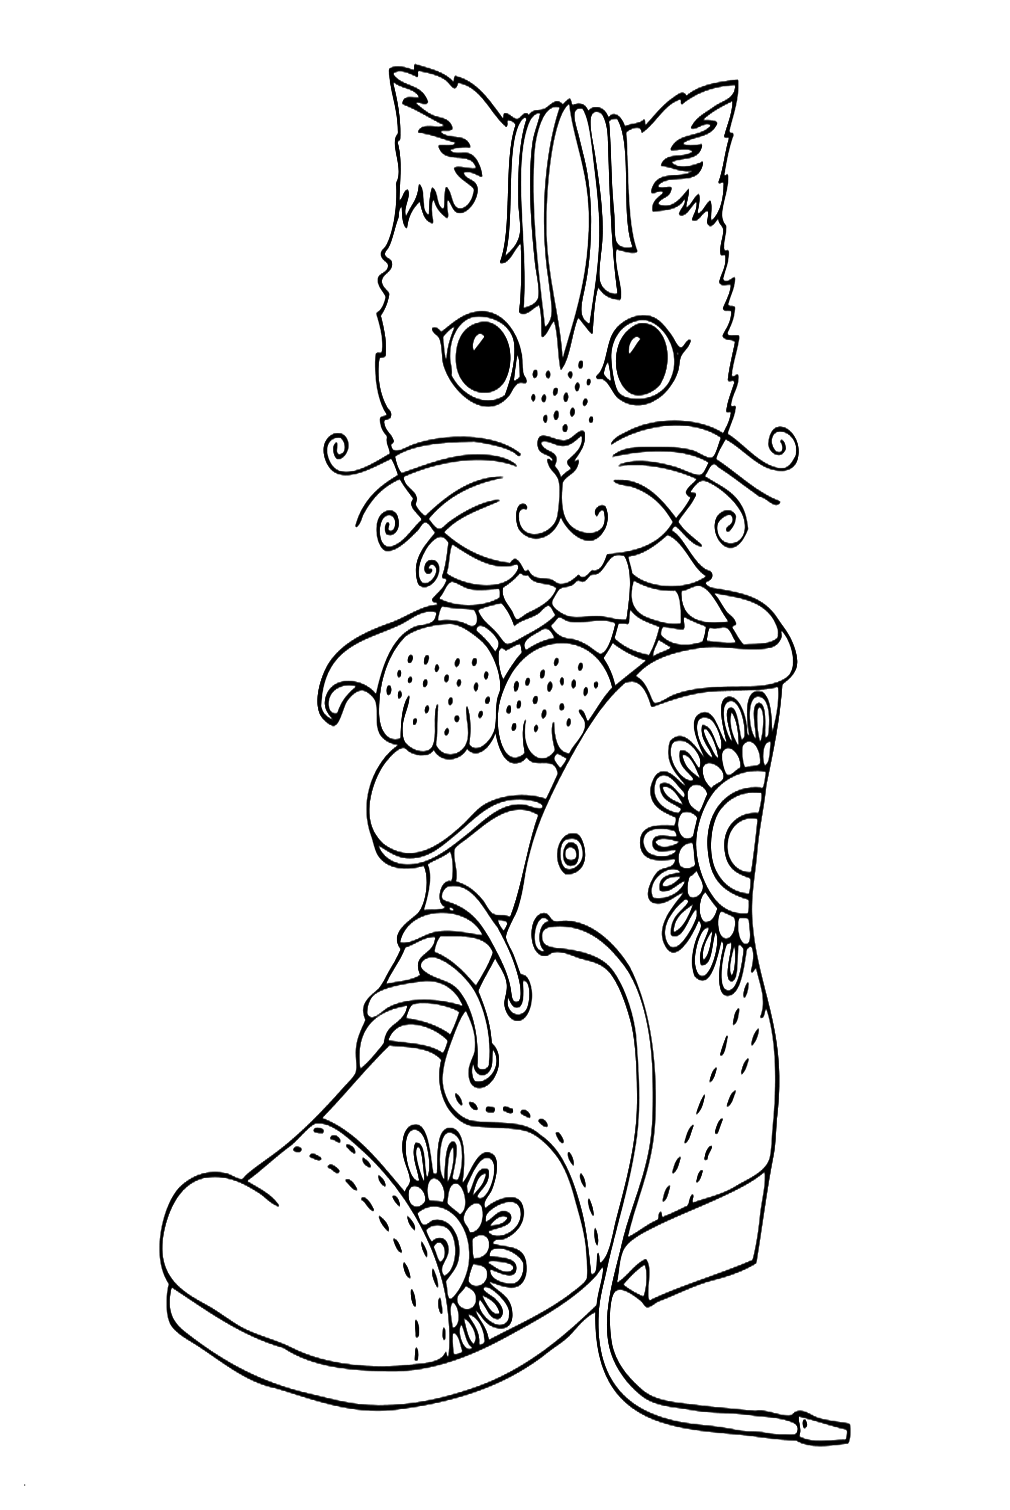 Kitty Boots Coloring Pages from Boots